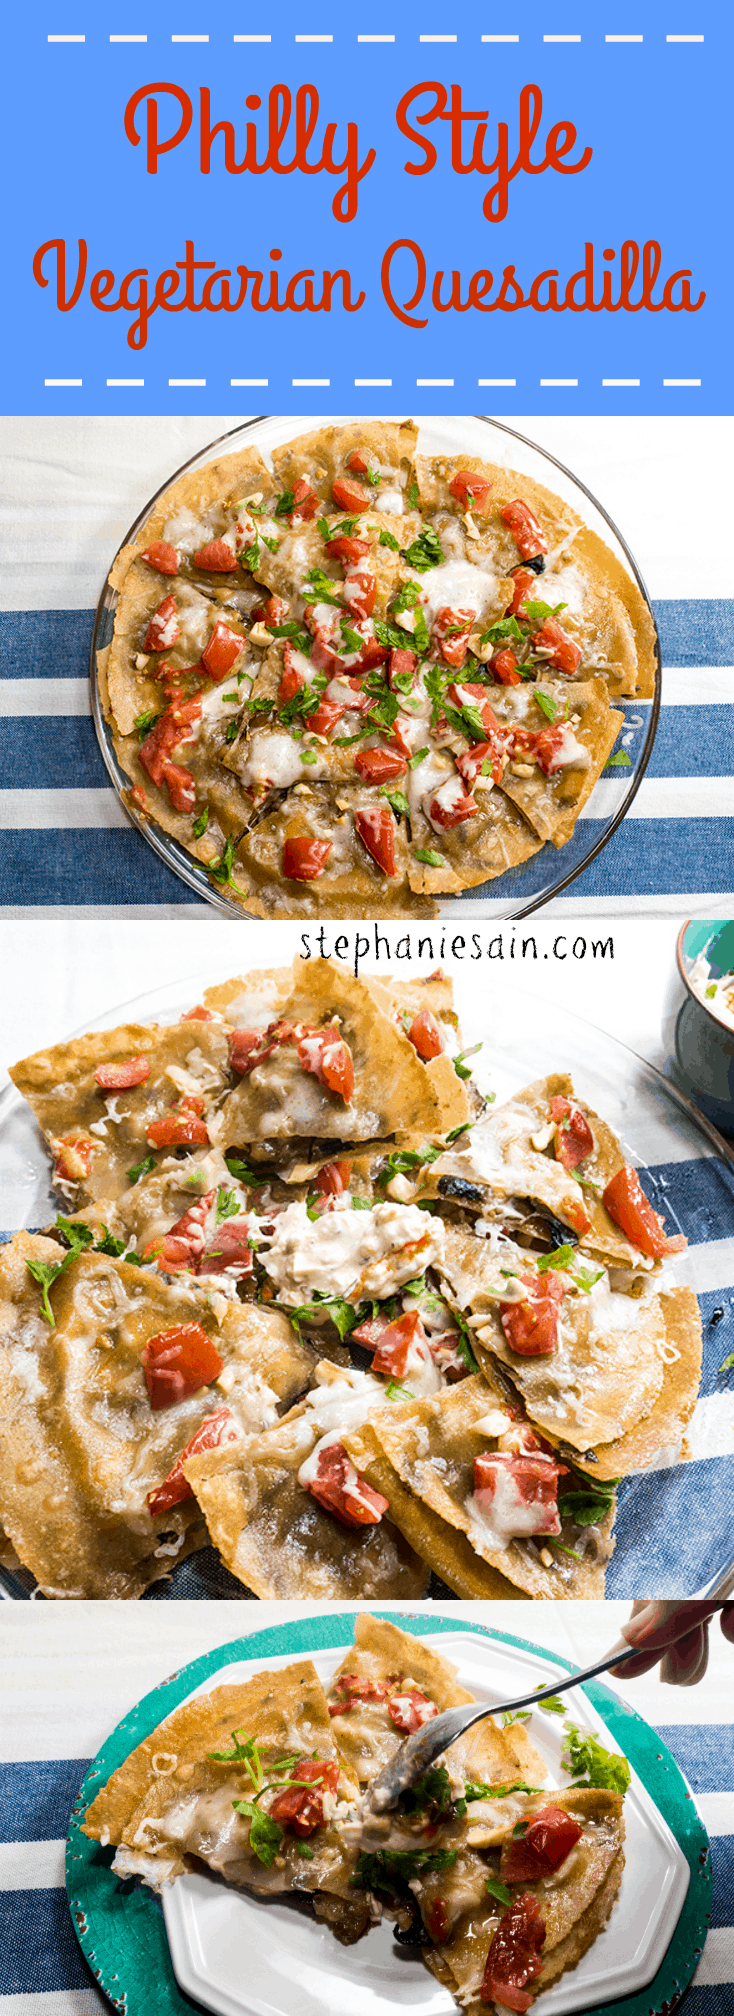 Philly Style Vegetarian Quesadilla is a easy, tasty to prepare appetizer that is gluten free. It can also serve as a tasty dinner for two.